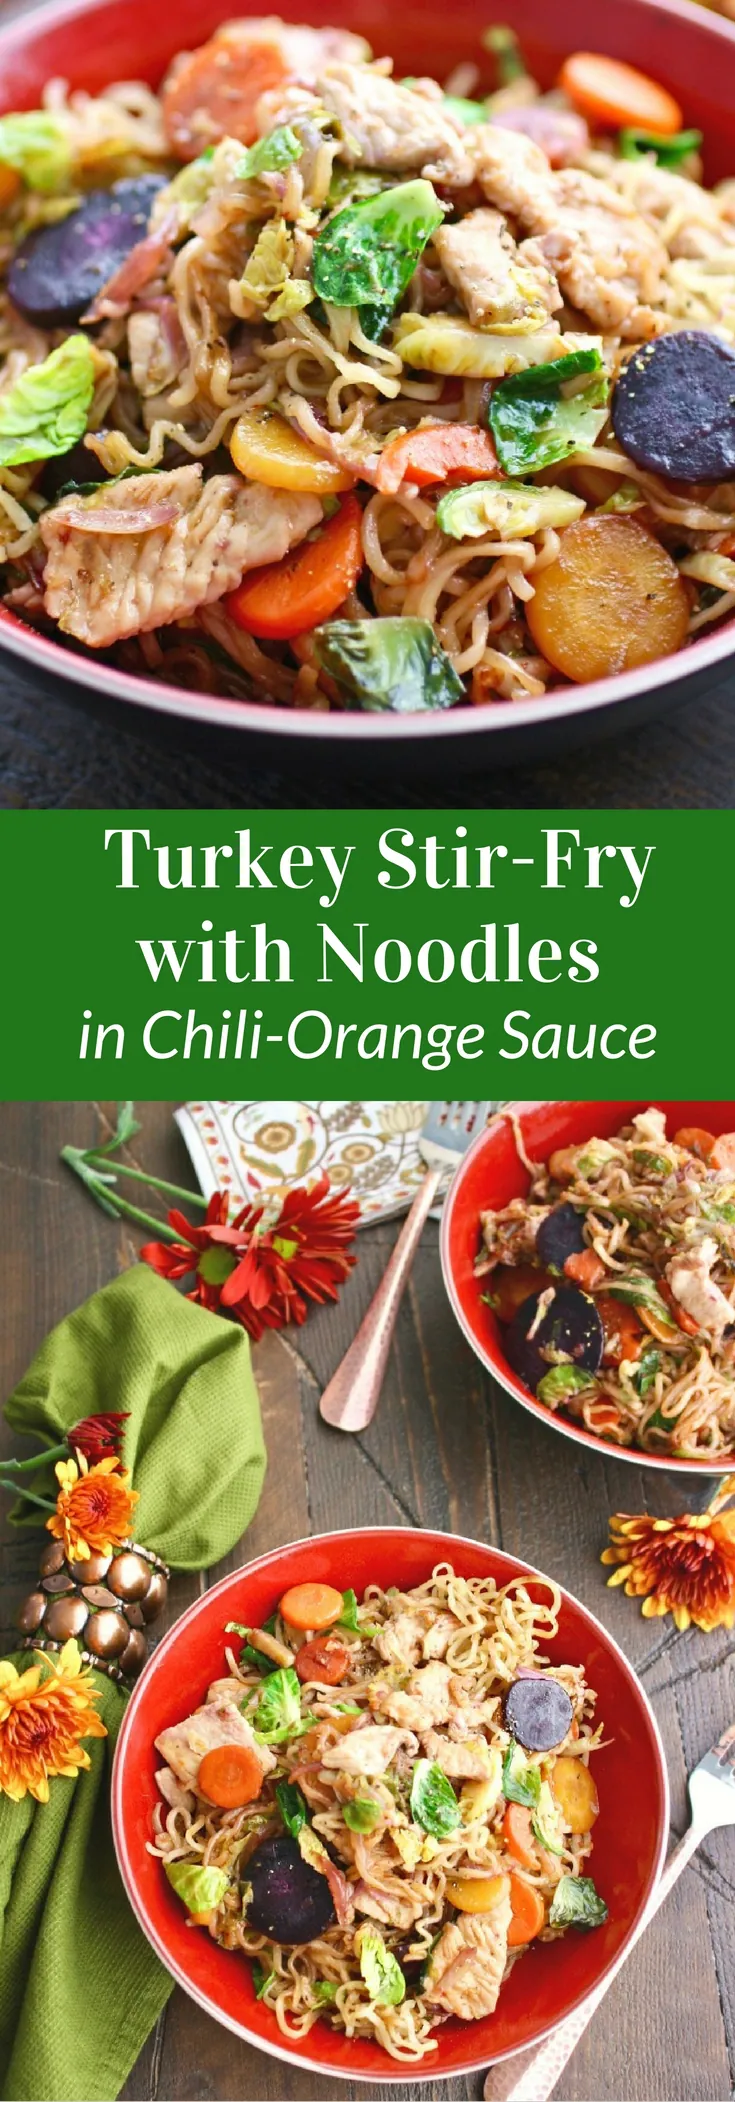 Turkey Stir-Fry with Noodles in Chili-Orange Sauce is a great way to add a twist to Thanksgiving Dinner!